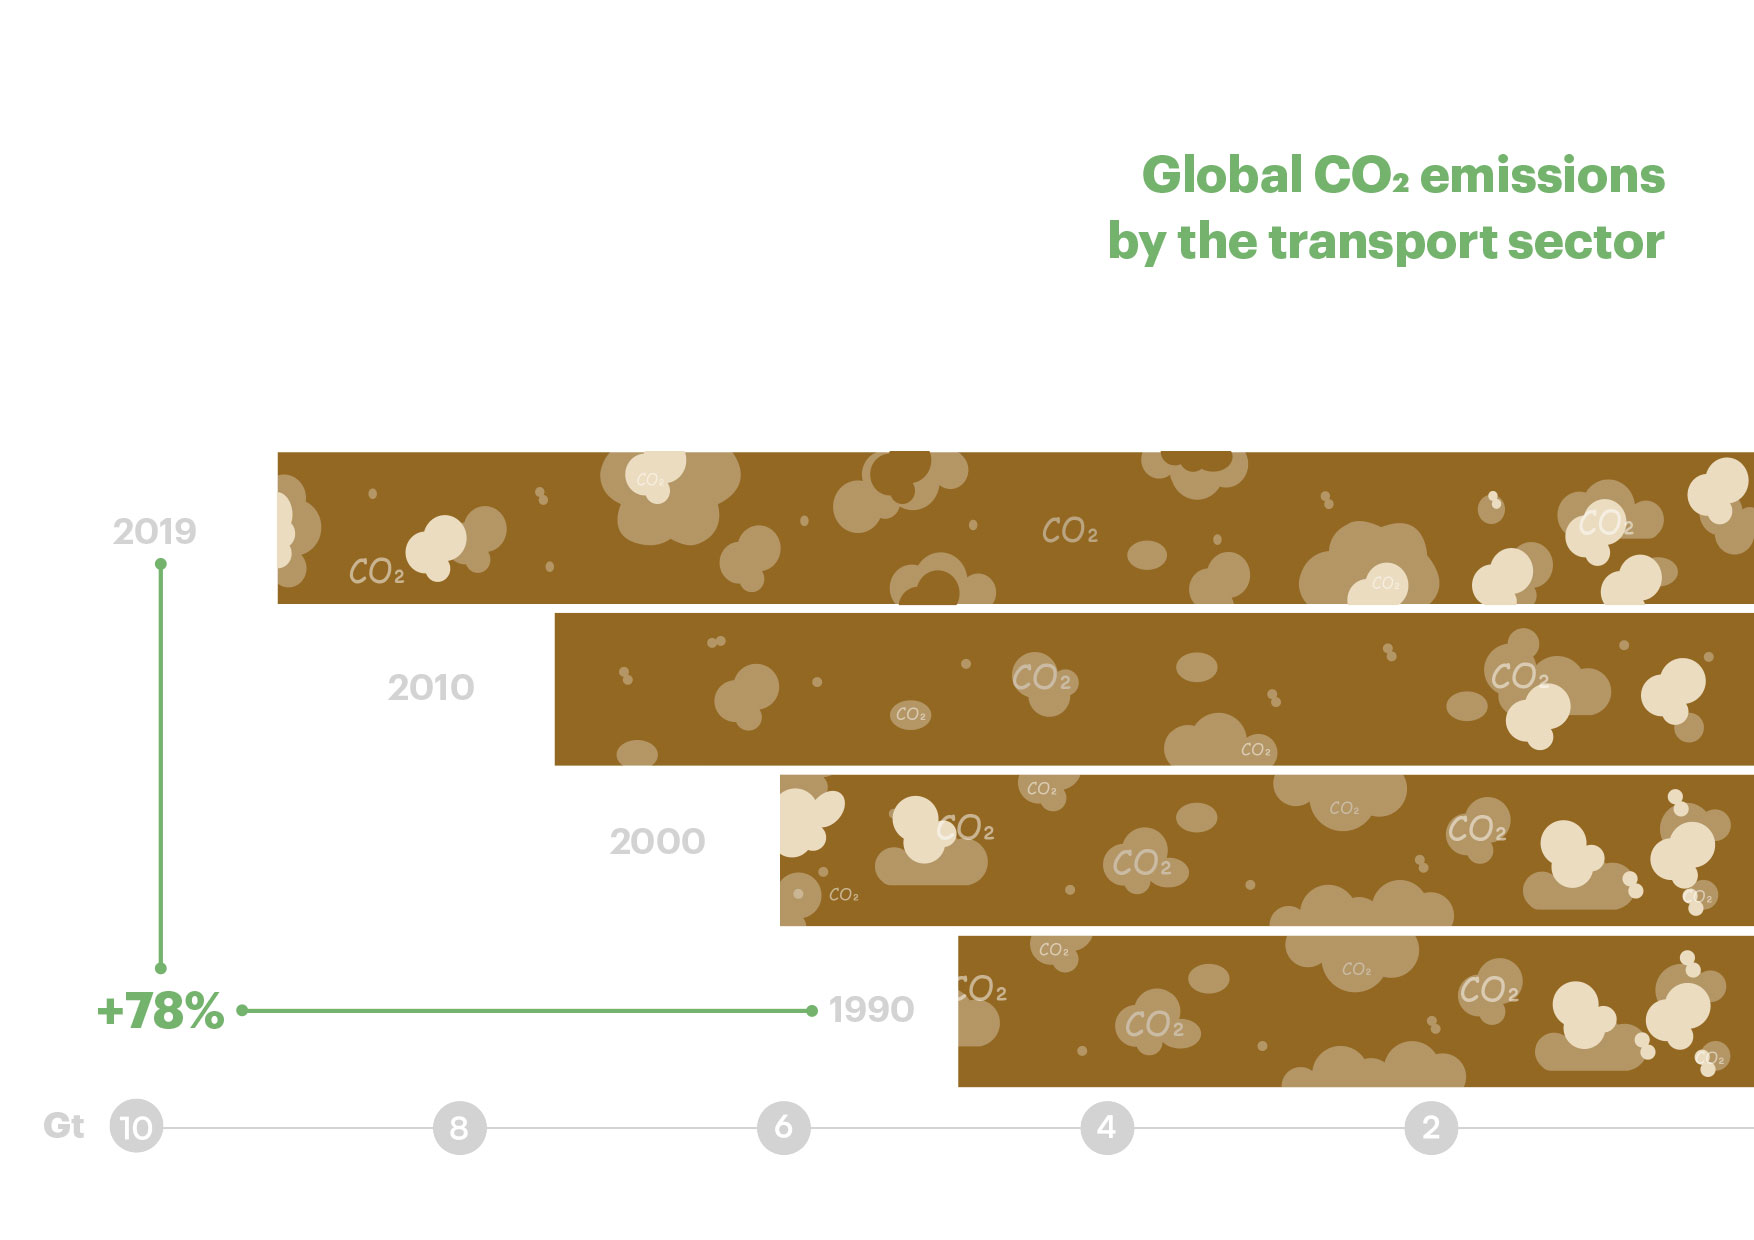 Global CO2 emissions by the transport sector are rising rapidly.